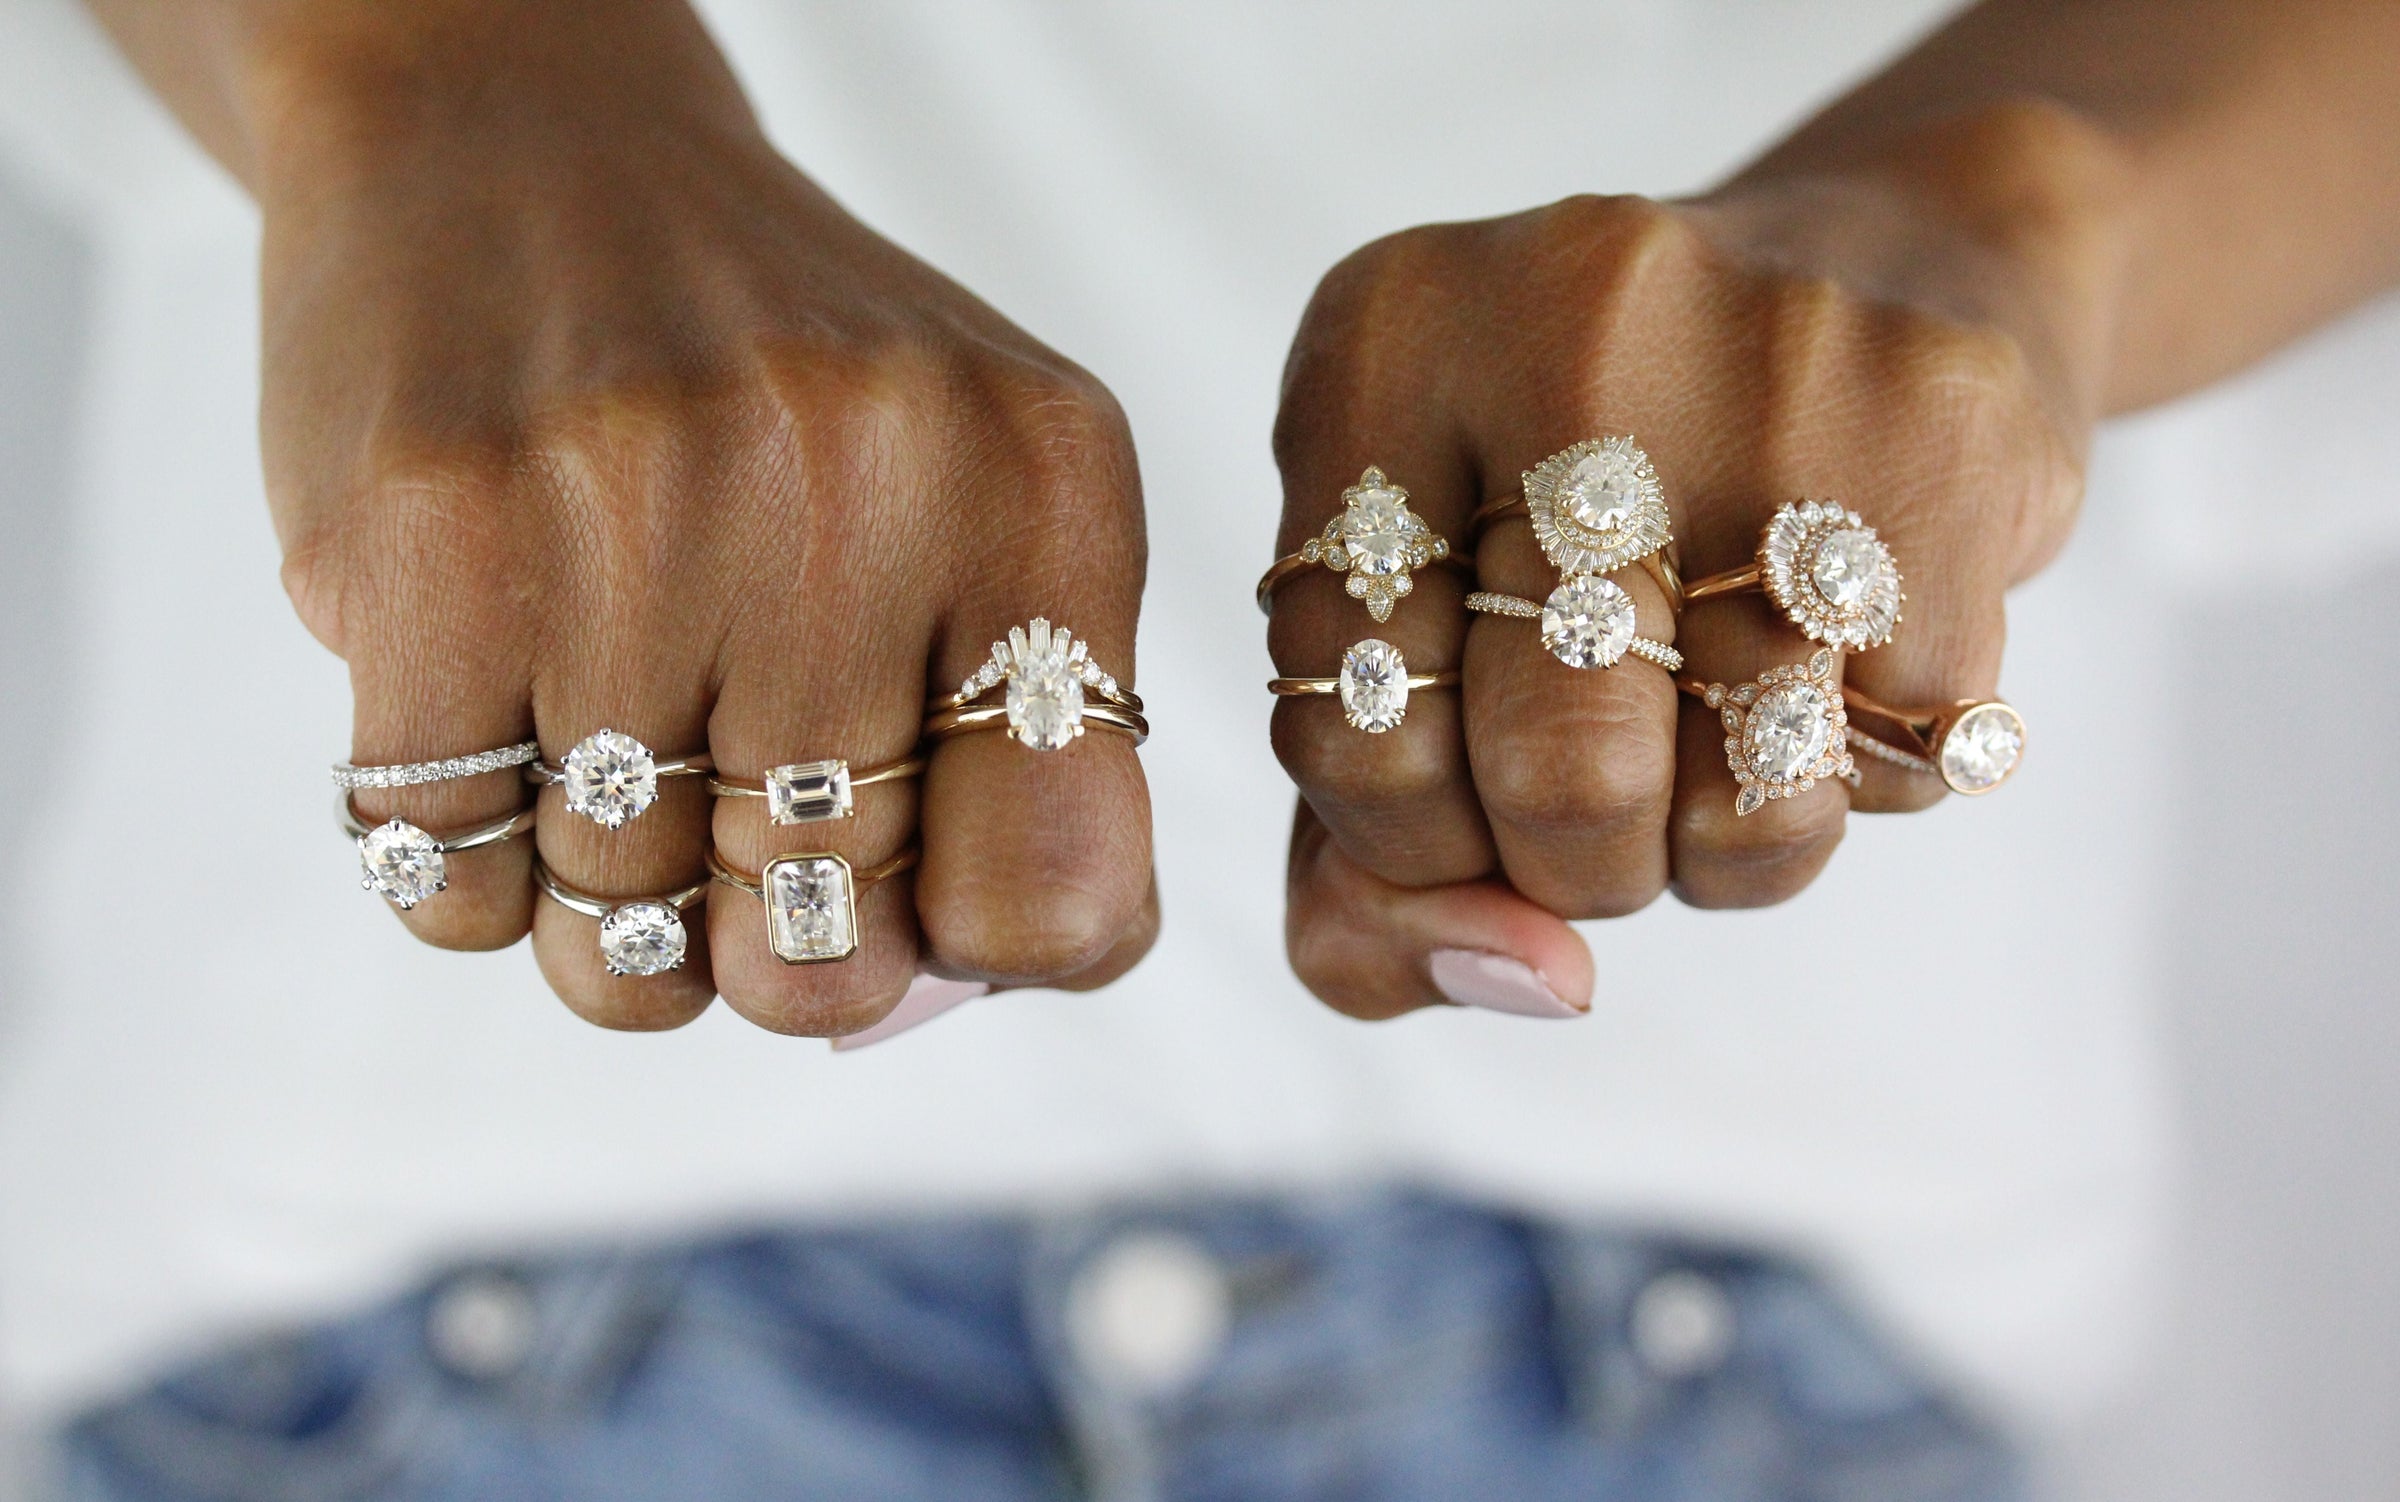 Sixteen rings stacked on a pair of knuckles